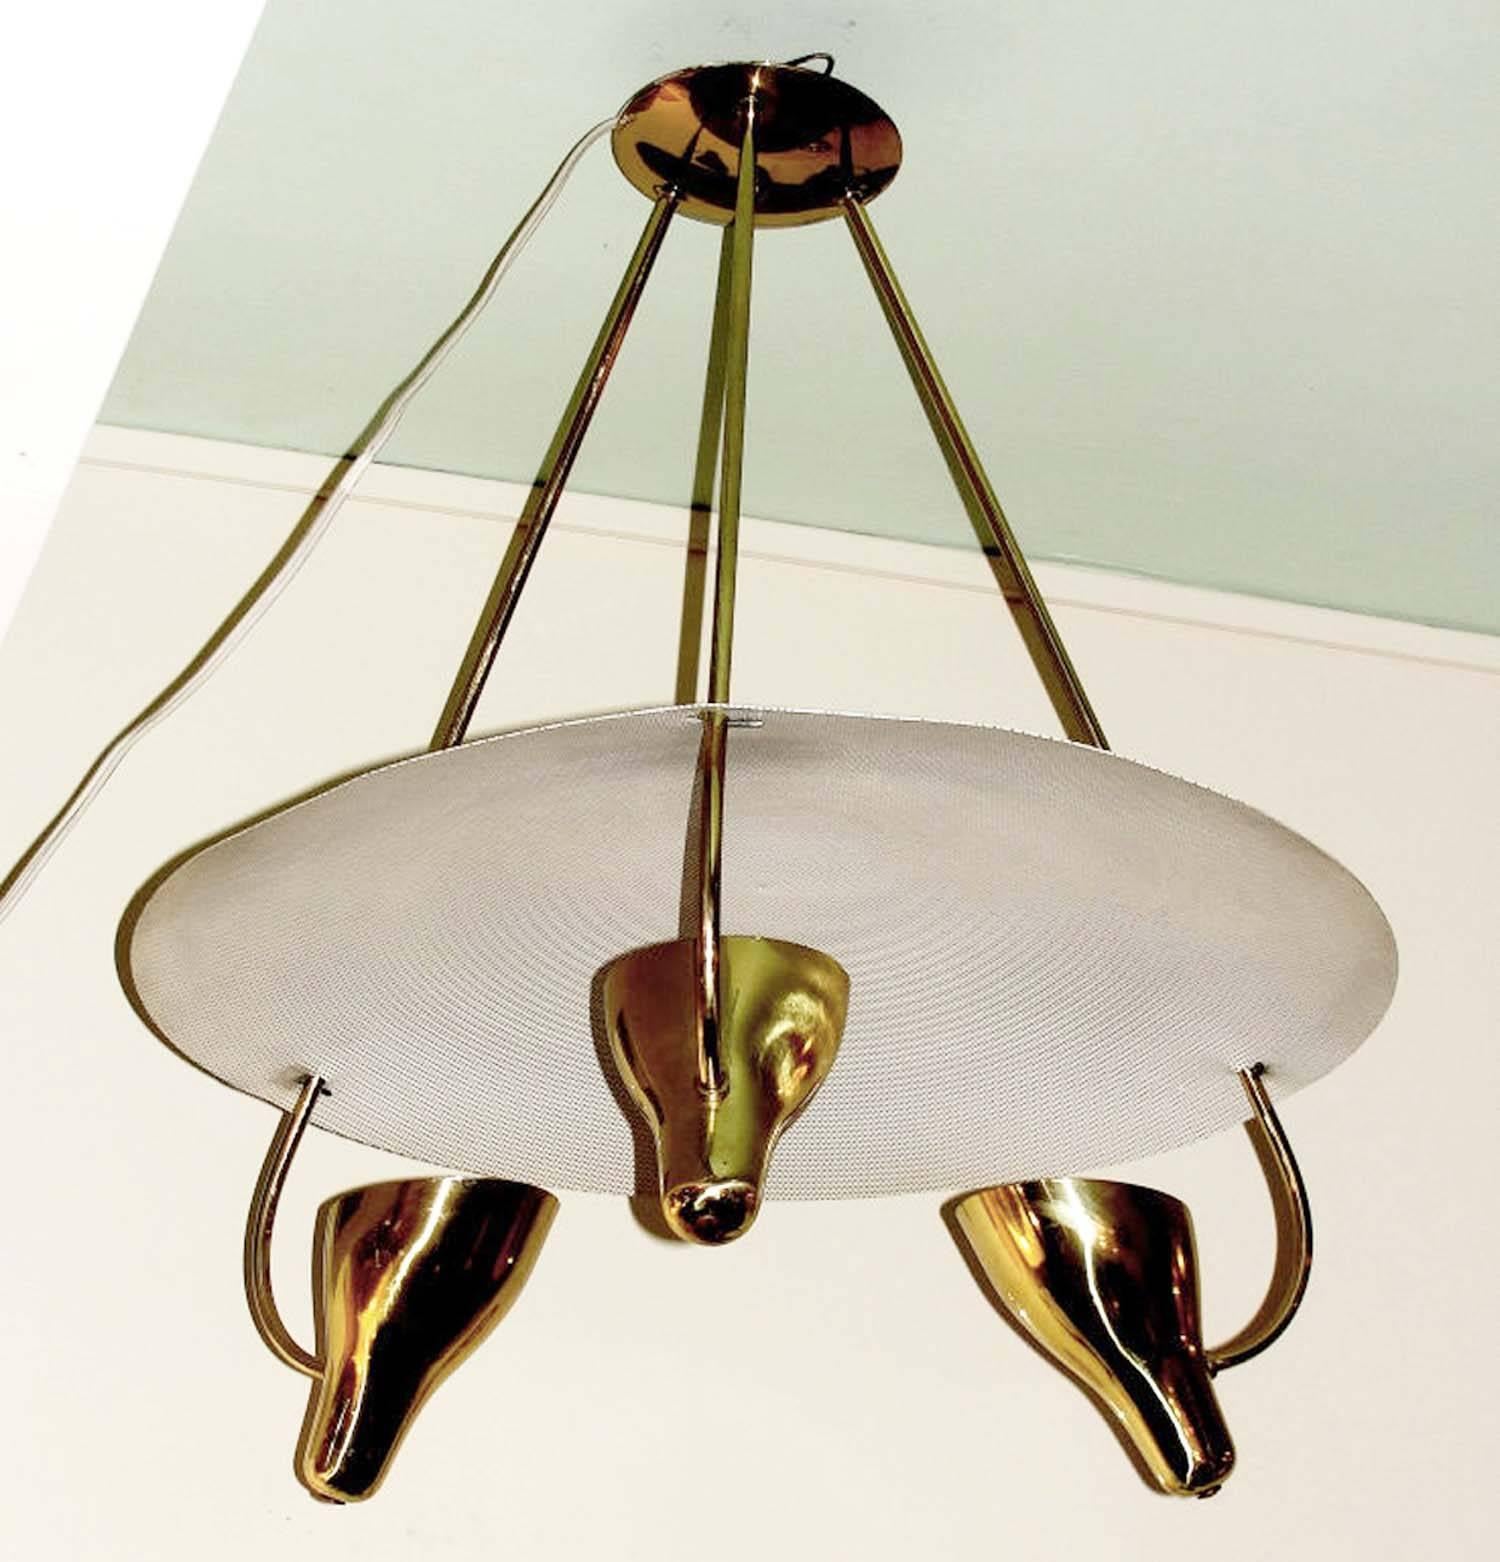 Sleek saucer shaped three light chandelier by Lightolier . Three brass stems come out from a perforated, concave white shade meant to diffuse the light projected from three brass cups. Holds three regular light sockets.